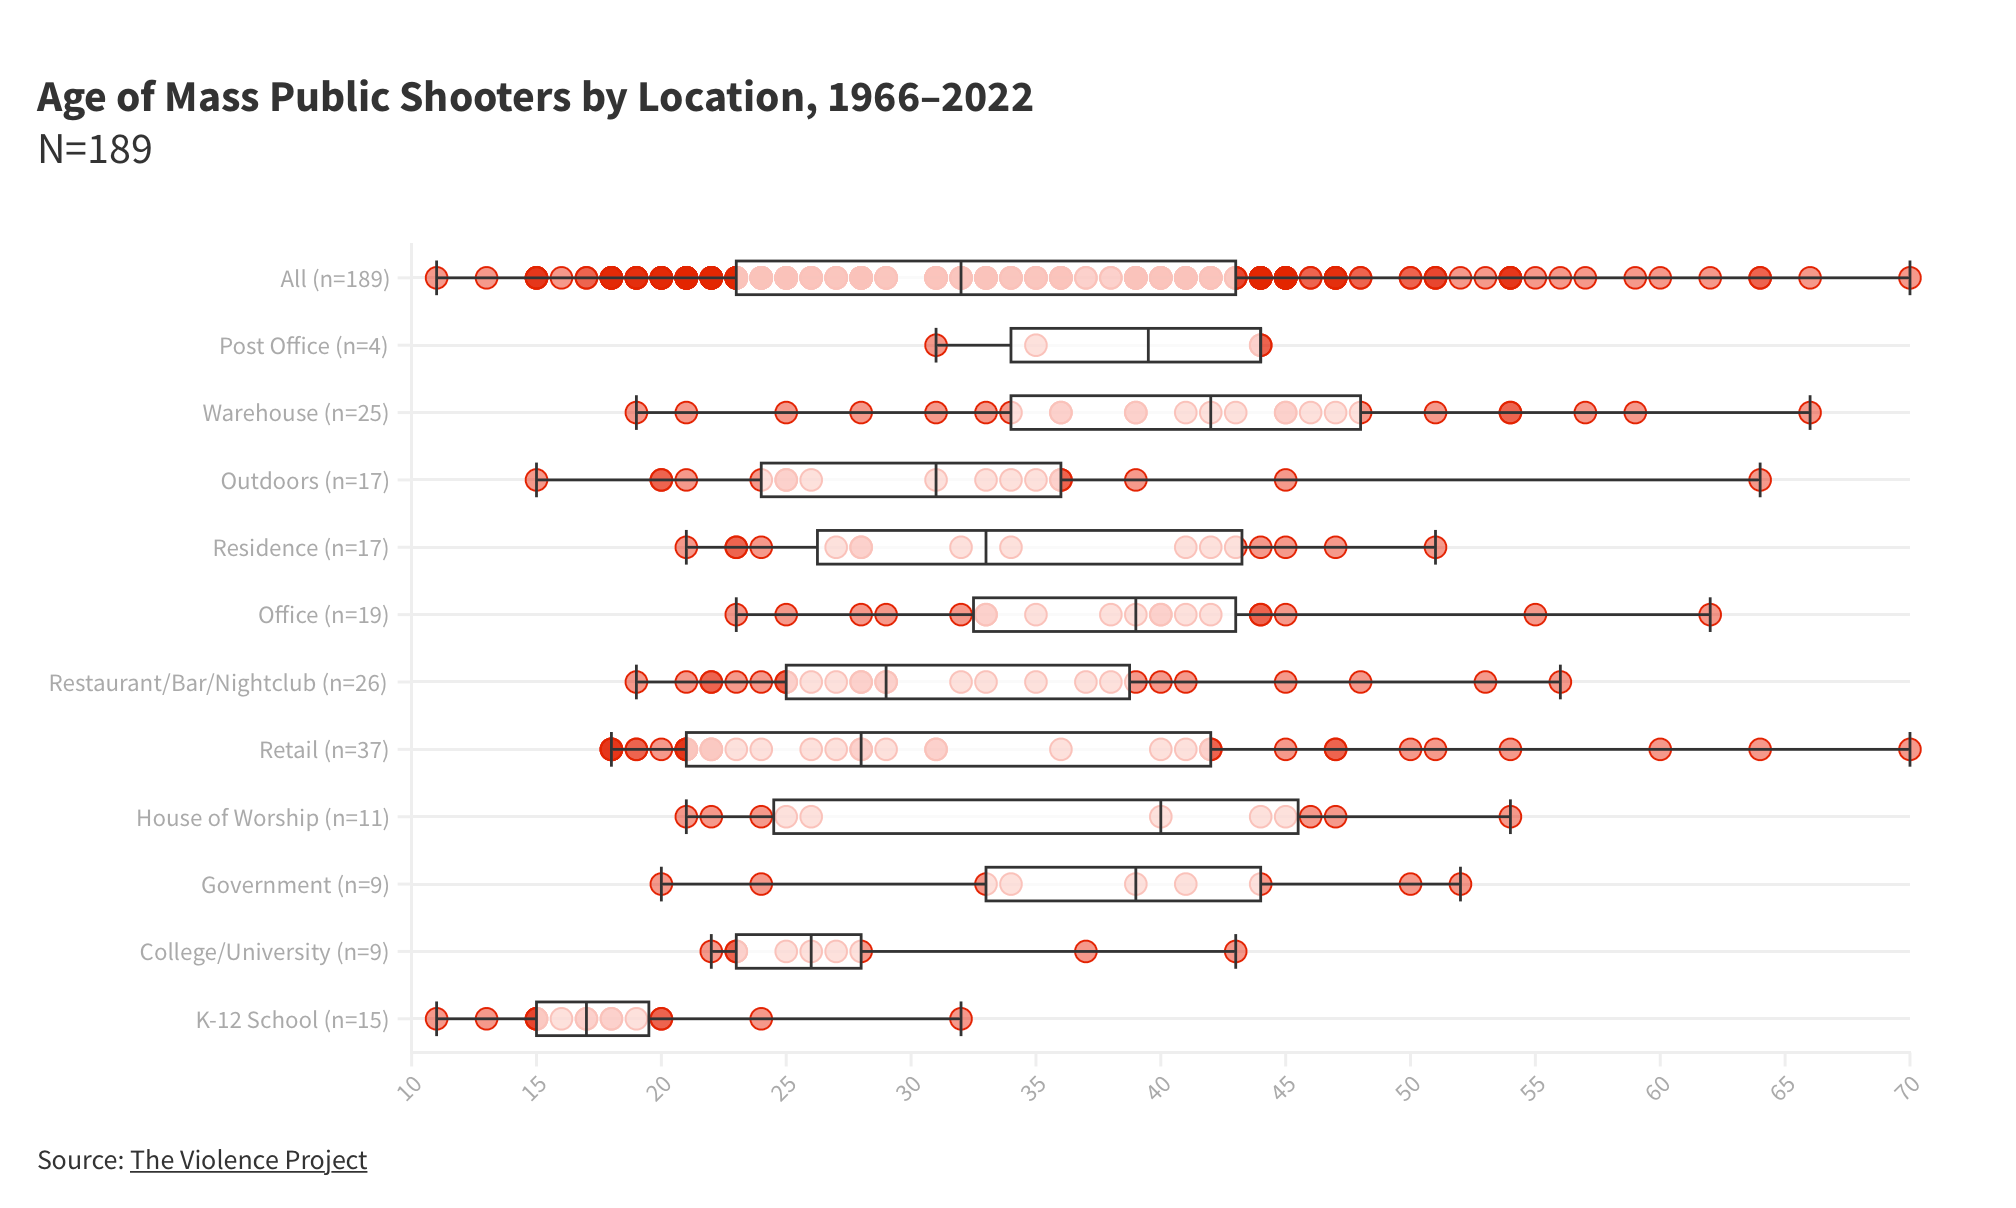 Ages of mass shooters in public locations, not including domestic or gang-related killings, from 1966 to 2022